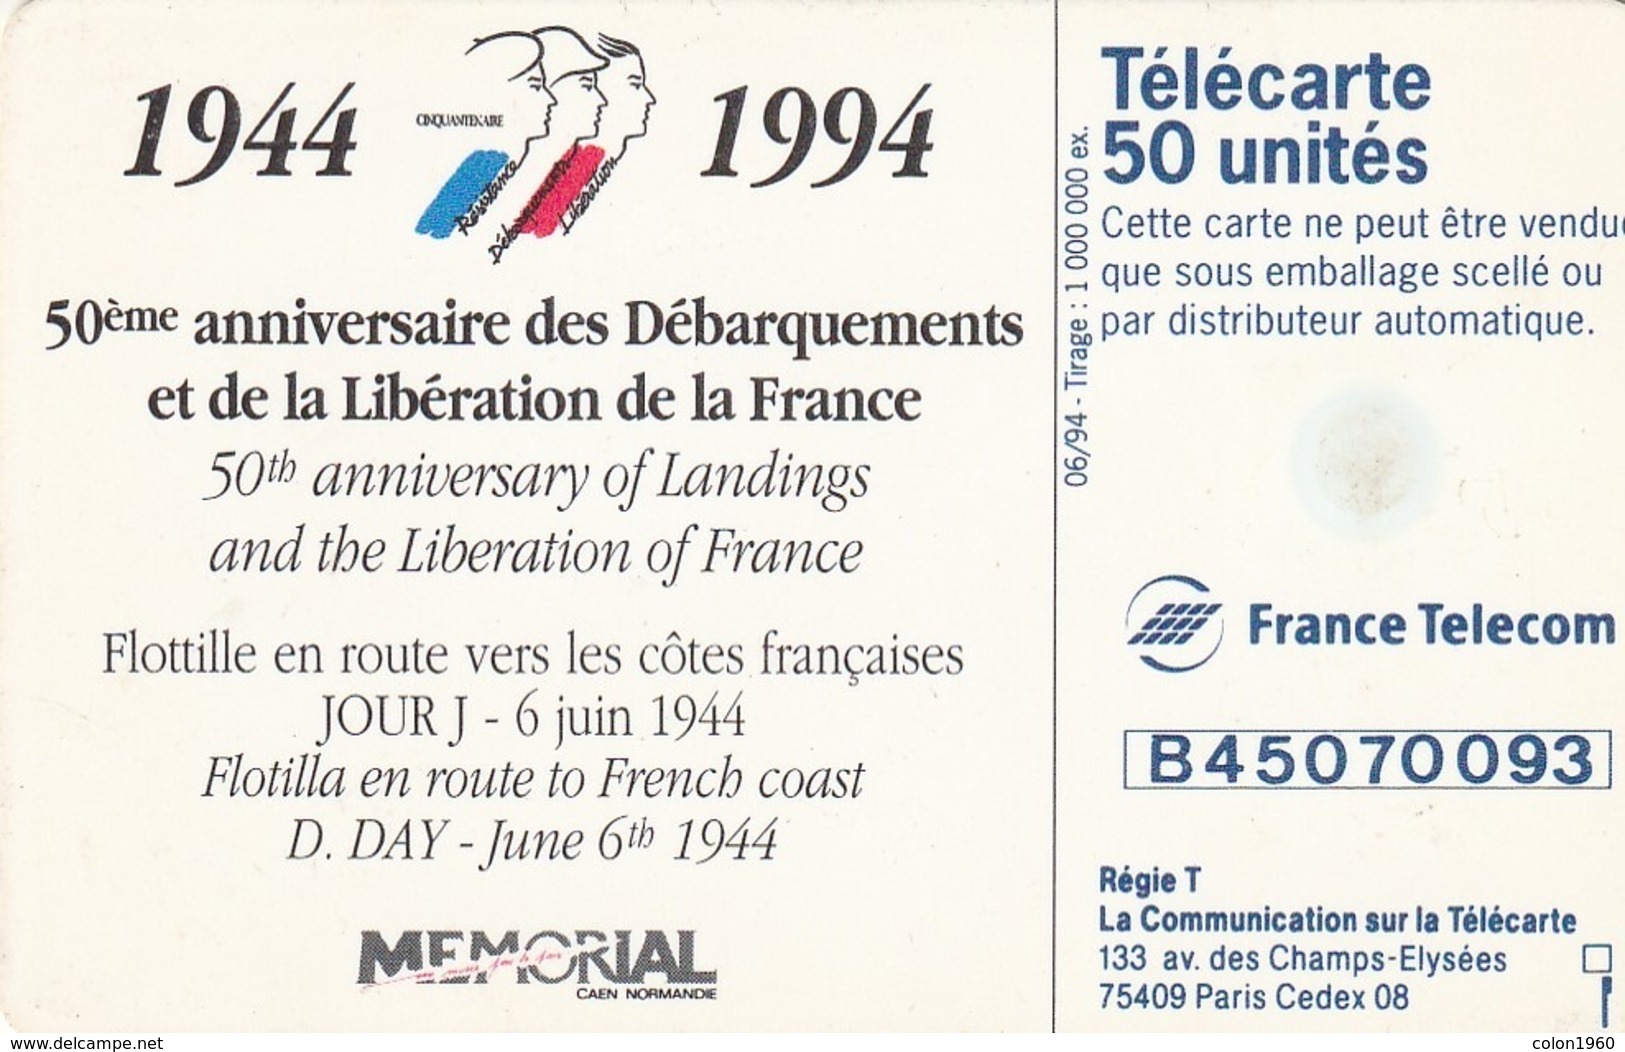 FRANCIA. 50th Anniversary Of Landings And The Liberation Of France. Debarquement Flotille. 0474. 06/94. (309). - Armada